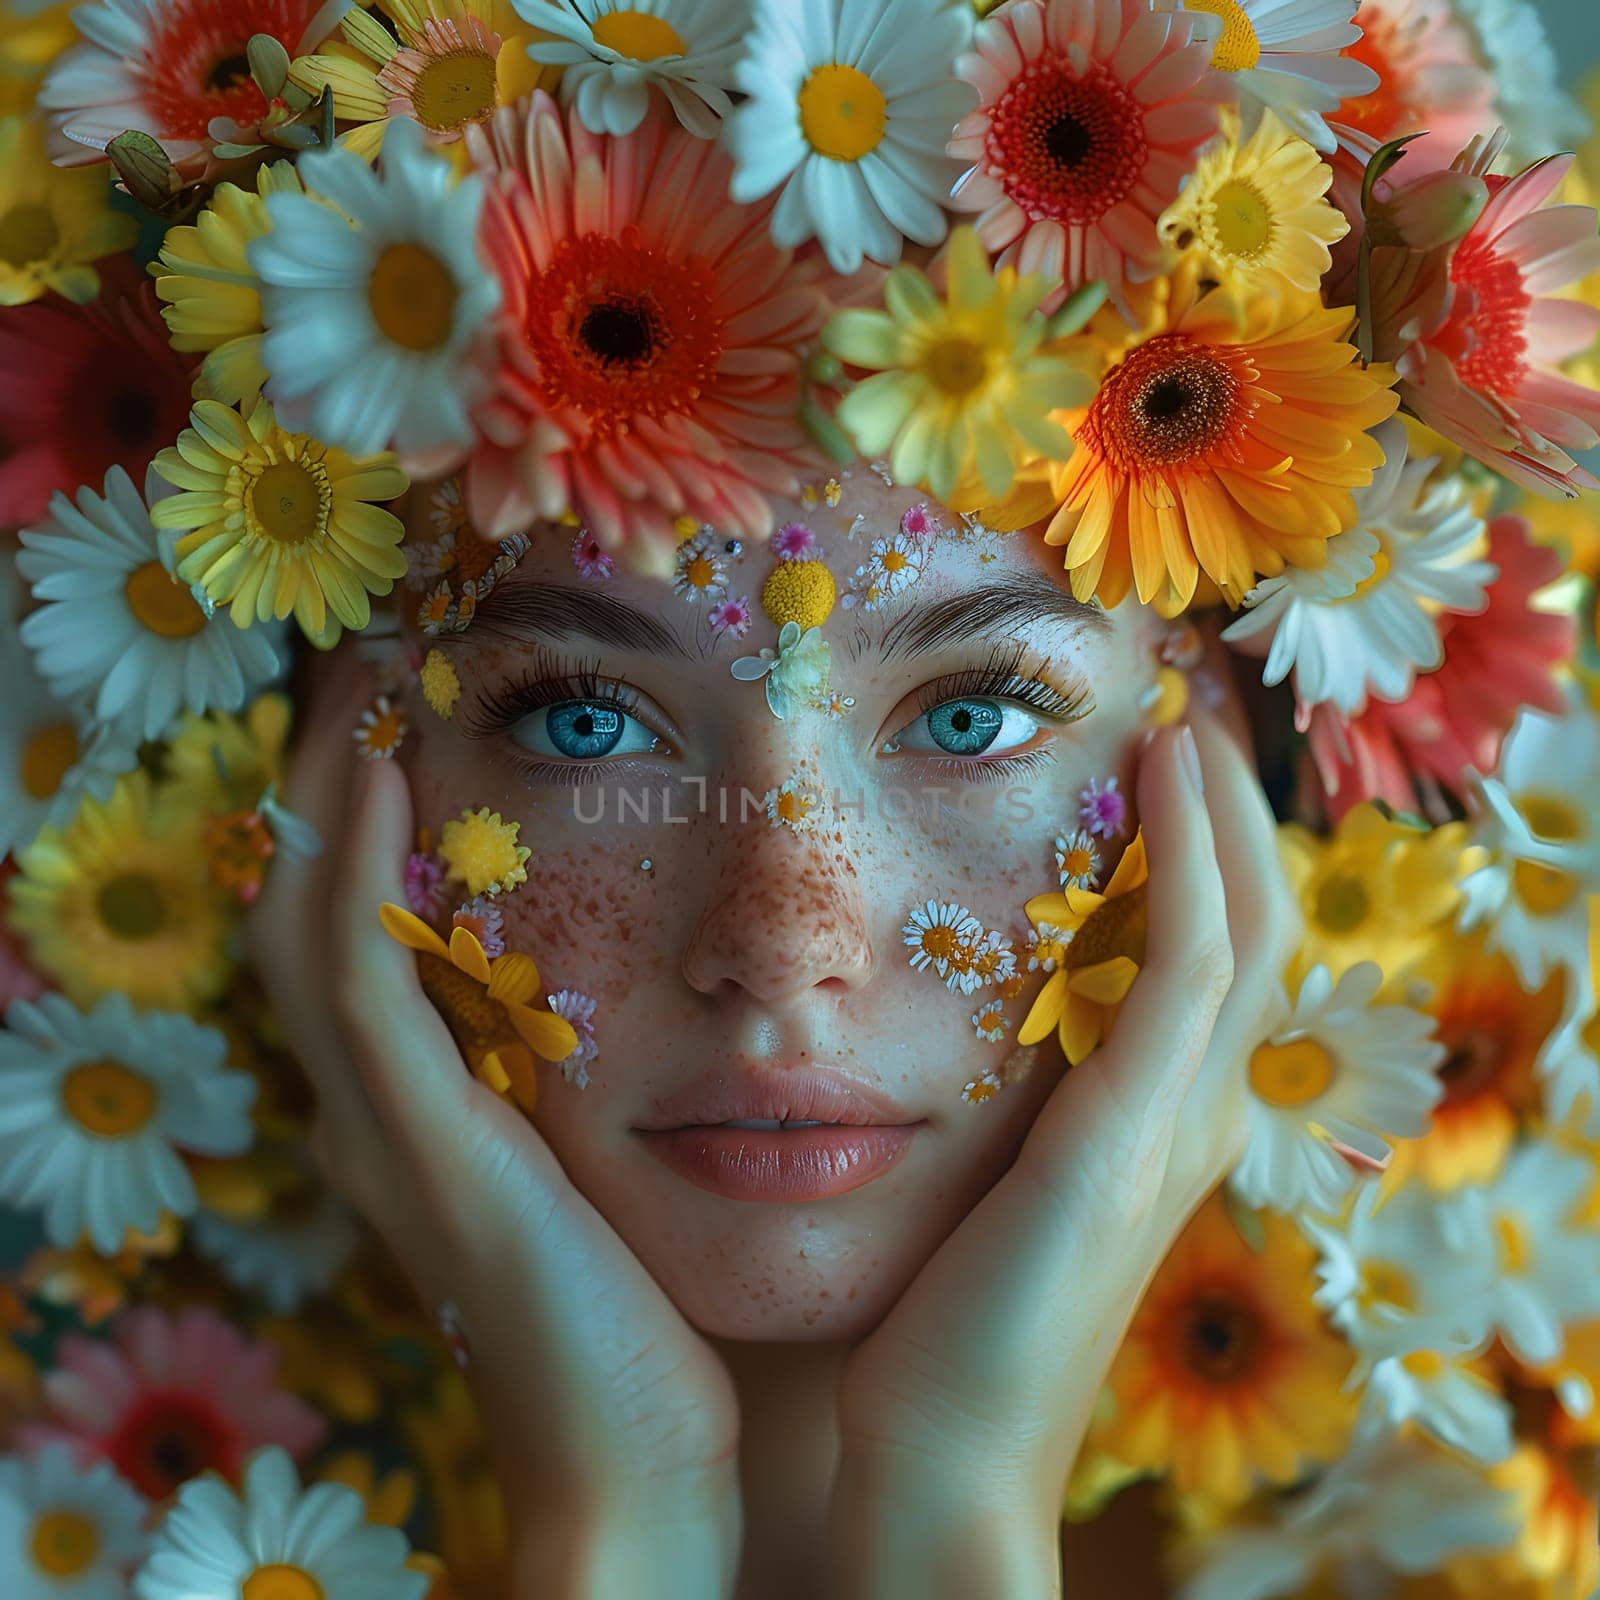 The woman looks happy with a flower wreath on her head, showcasing the art of visual arts. The yellow petals and electric blue plant create a stunning closeup, emphasizing her beauty